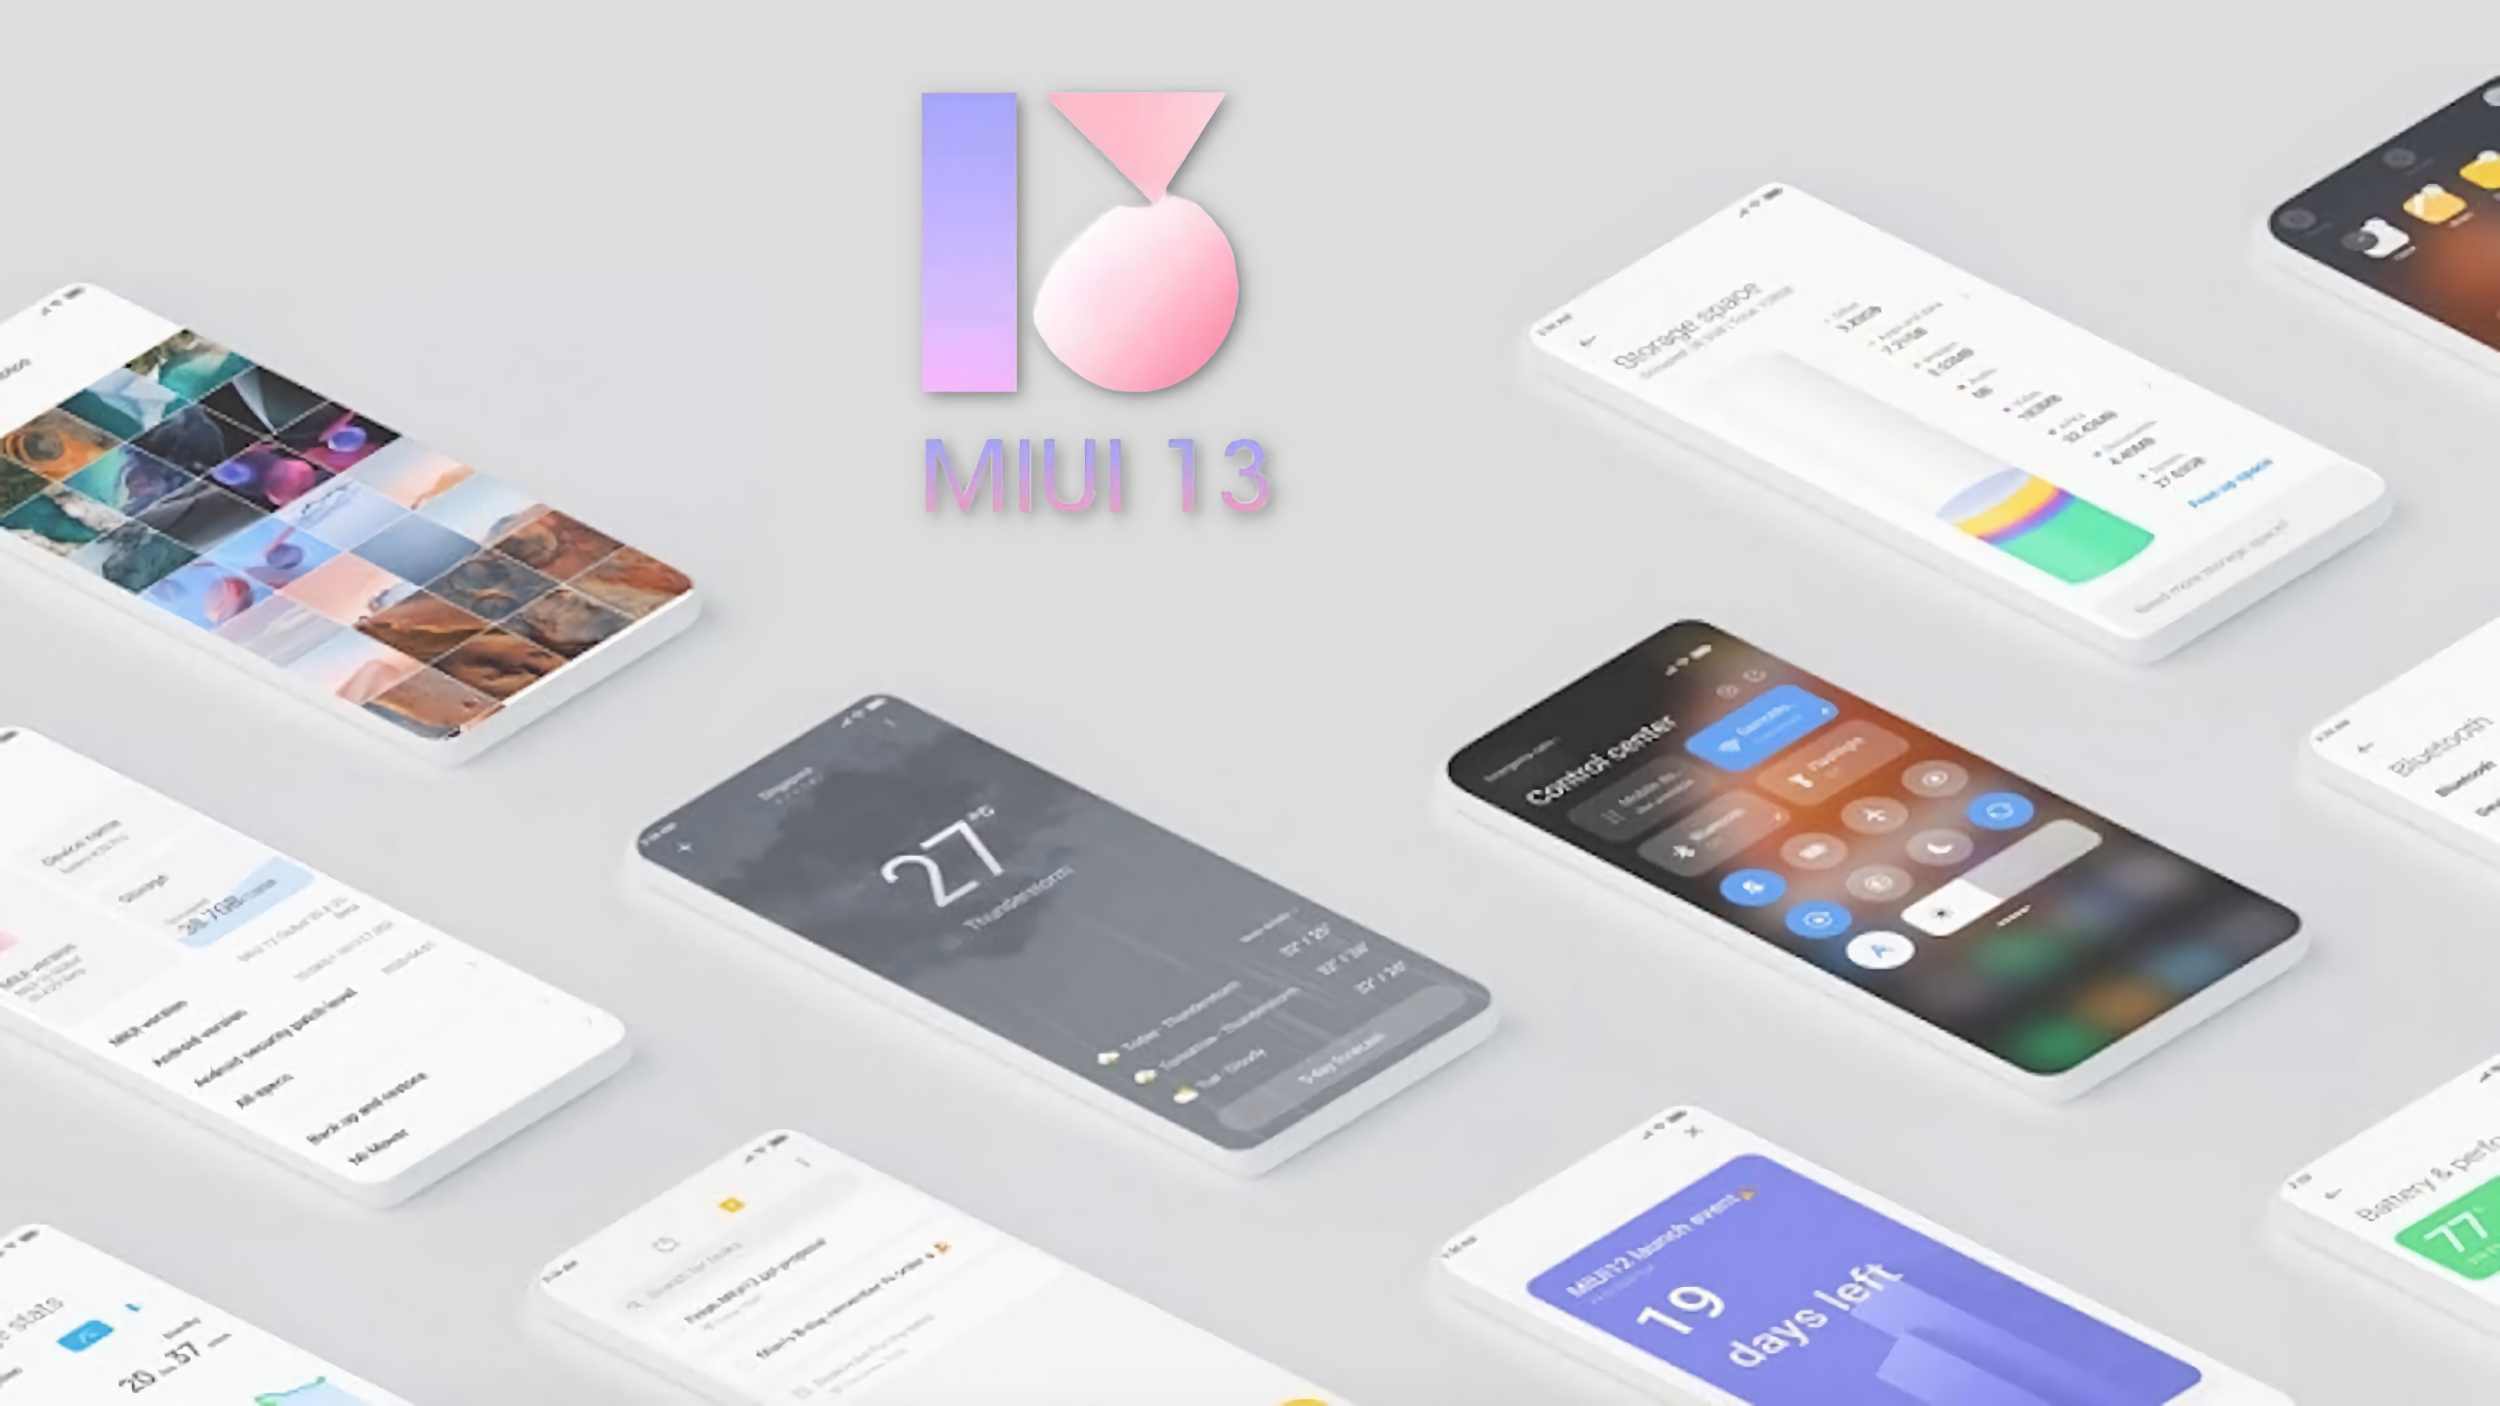 Which Xiaomi and Redmi smartphones will be the first to receive the MIUI 13 update